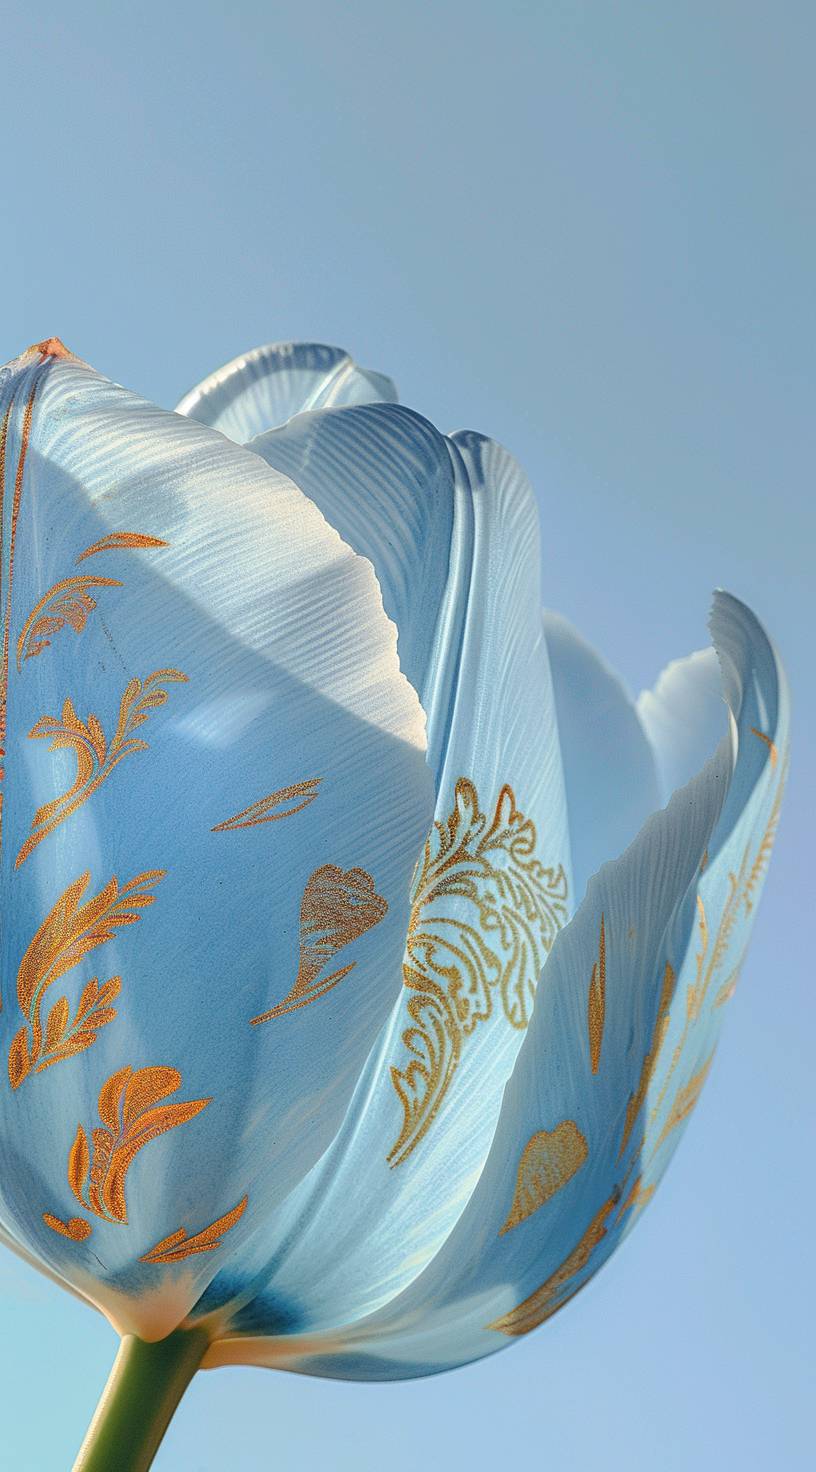 Blue tulip petals with an embroidered pattern in gold, set against the backdrop of blue sky, captured from below. The photo was taken in the style of Canon EOS R5 and has a closeup perspective. It is a high quality image with intricate details.